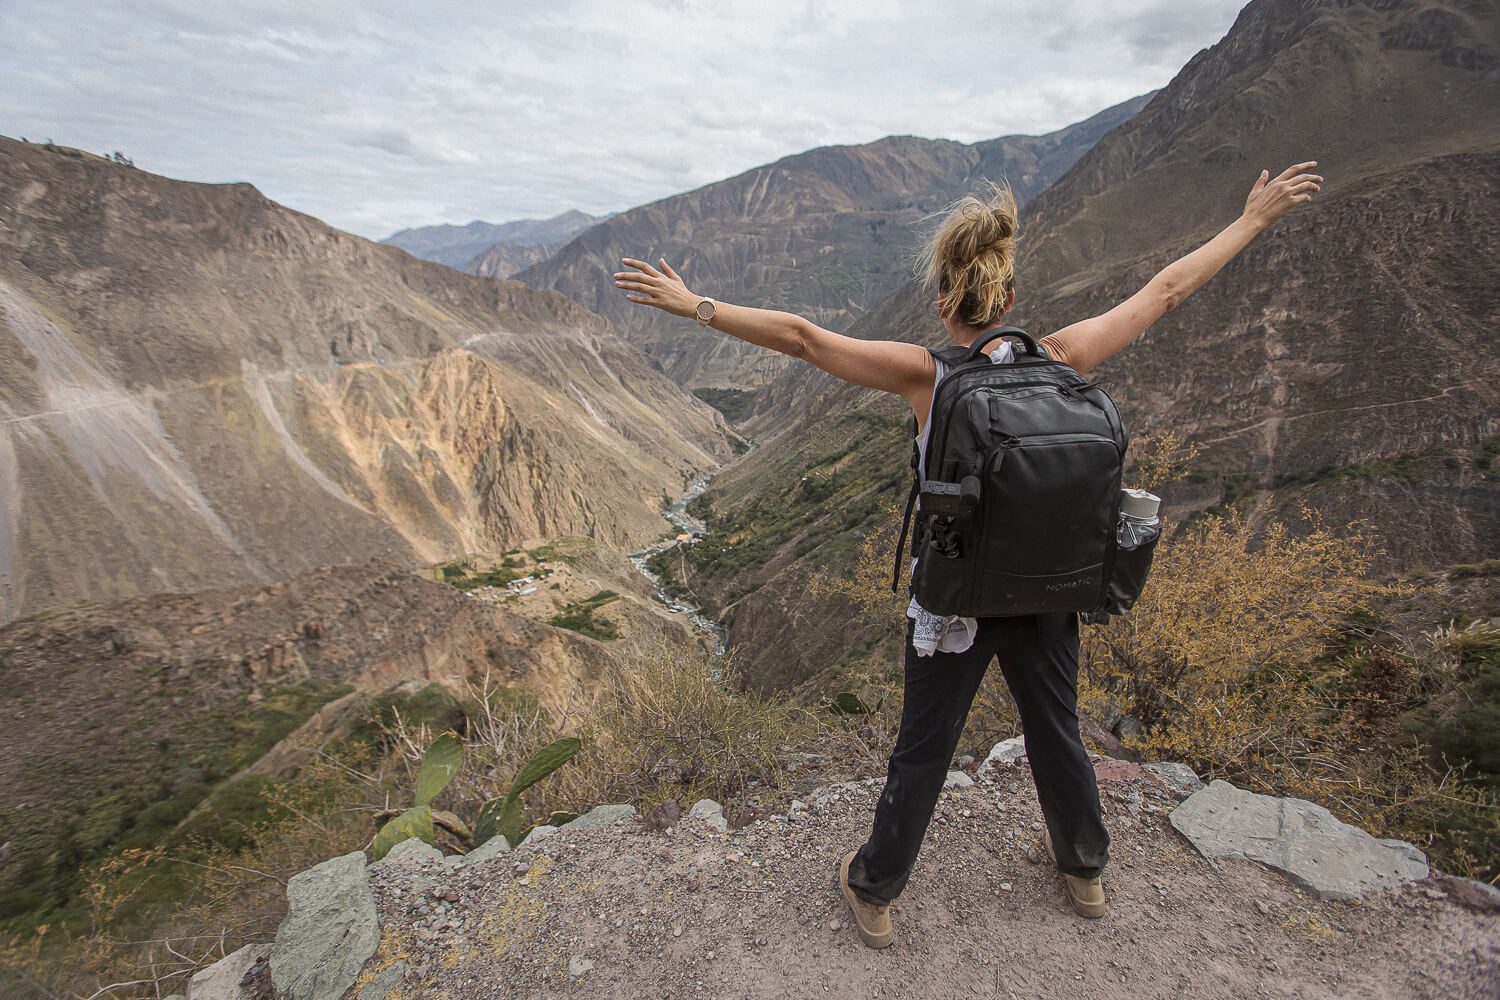 The viewpoint in Colca Canyon